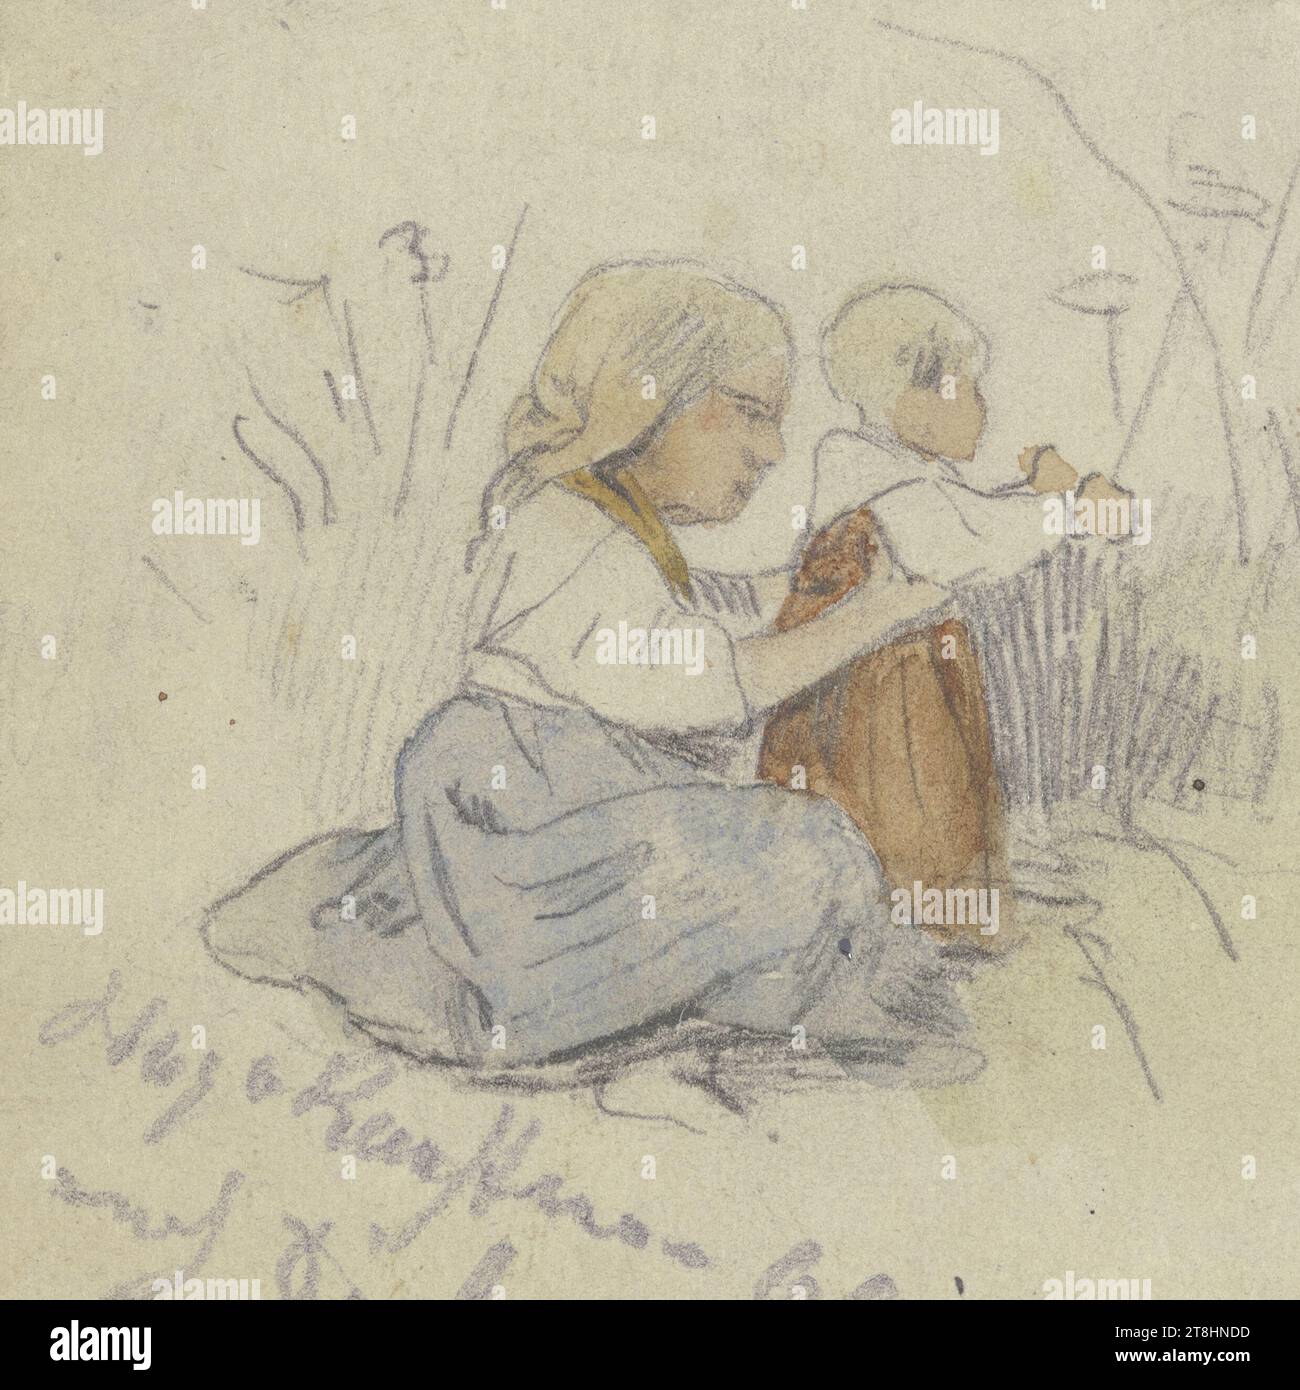 HUGO KAUFFMANN, after JAKOBFürCHTEGOTT DIELMANN, Little girl with child on the floor, 1860, sheet, 45 x 45 mm, pencil, watercolored, on thin vellum paper, drawn on rag cardboard, Little girl with child on the floor, HUGO KAUFFMANN, inventor, after JAKOBFürchtegott DIELMANN, 19TH CENTURY, DRAWING, pencil, watercolored, on thin vellum paper, drawn on ragboard, GRAPHITE-CLAY MIXTURE, WATERCOLOR, VELIN PAPER, PENCIL DRAWING, WATERCOLOR, GERMAN, COPY, Signed, dated and inscribed lower left, in pencil, Hugo Kauffmann 60 / after Dielmann Stock Photo